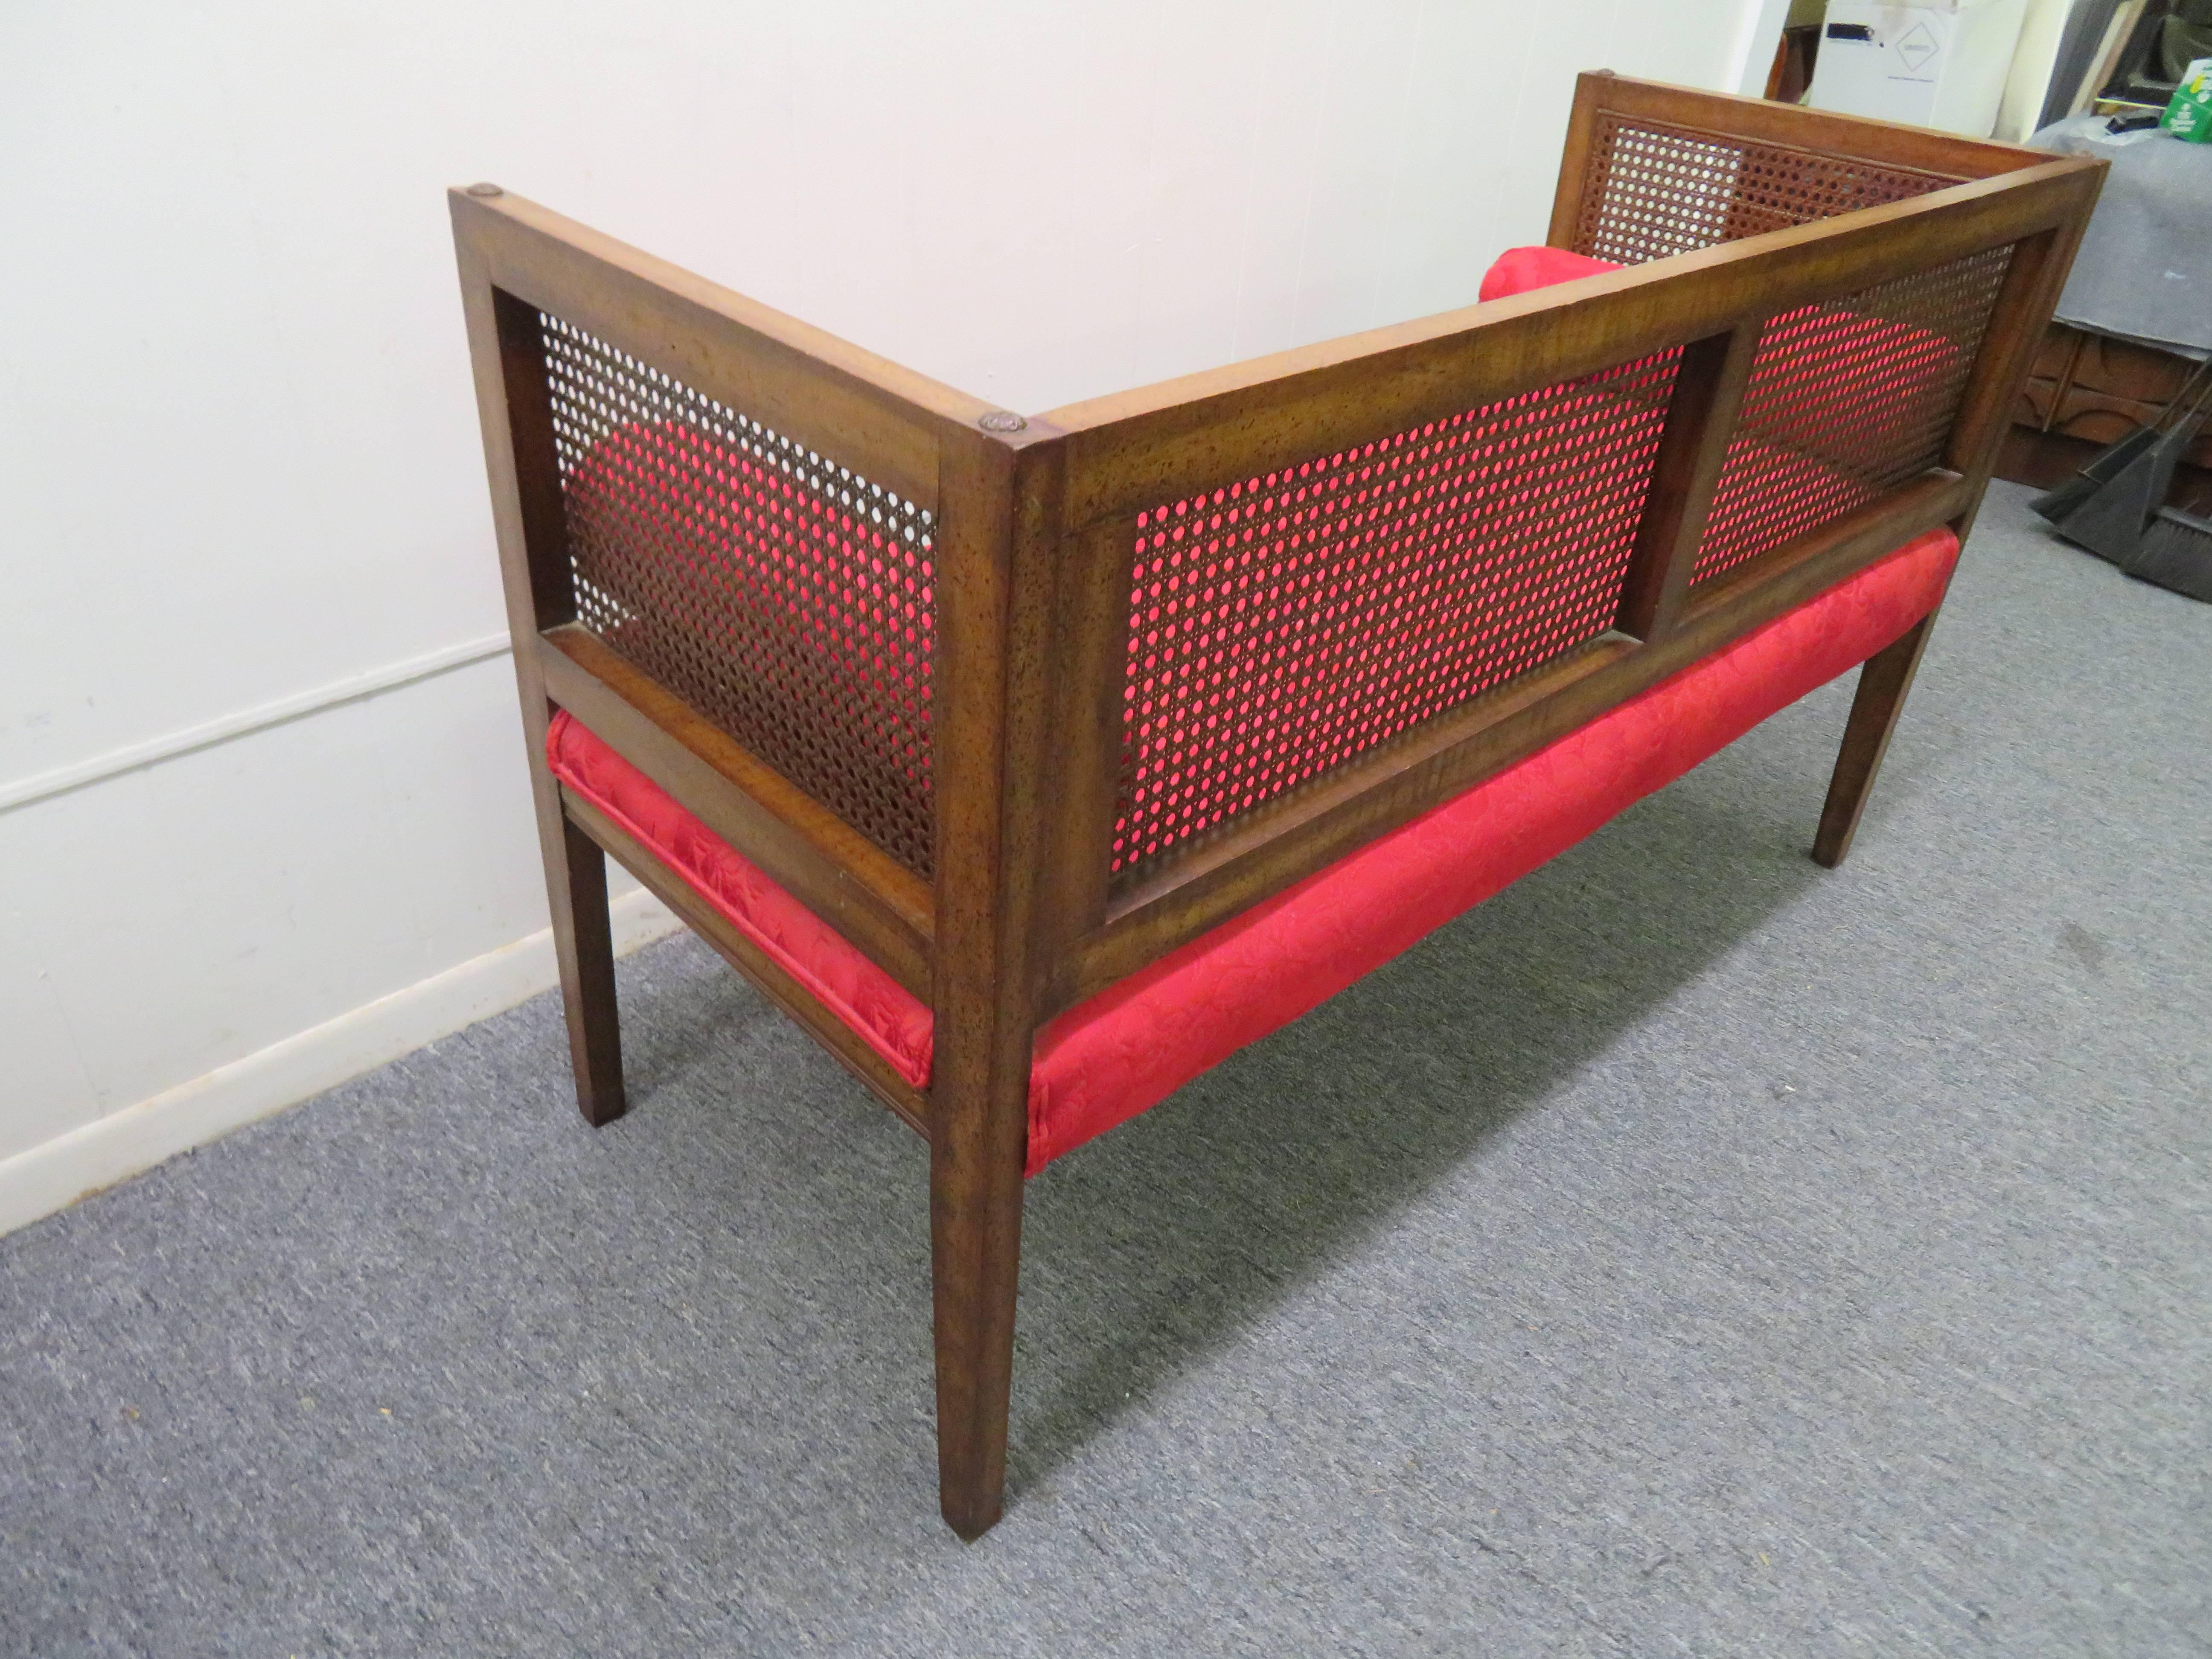 Gorgeous Hollywood Regency boxy caned bench. The cushions will need to be reupholstered but the caning is in fine condition. This piece retains its original distressed finish and still looks fine-great vintage appeal.